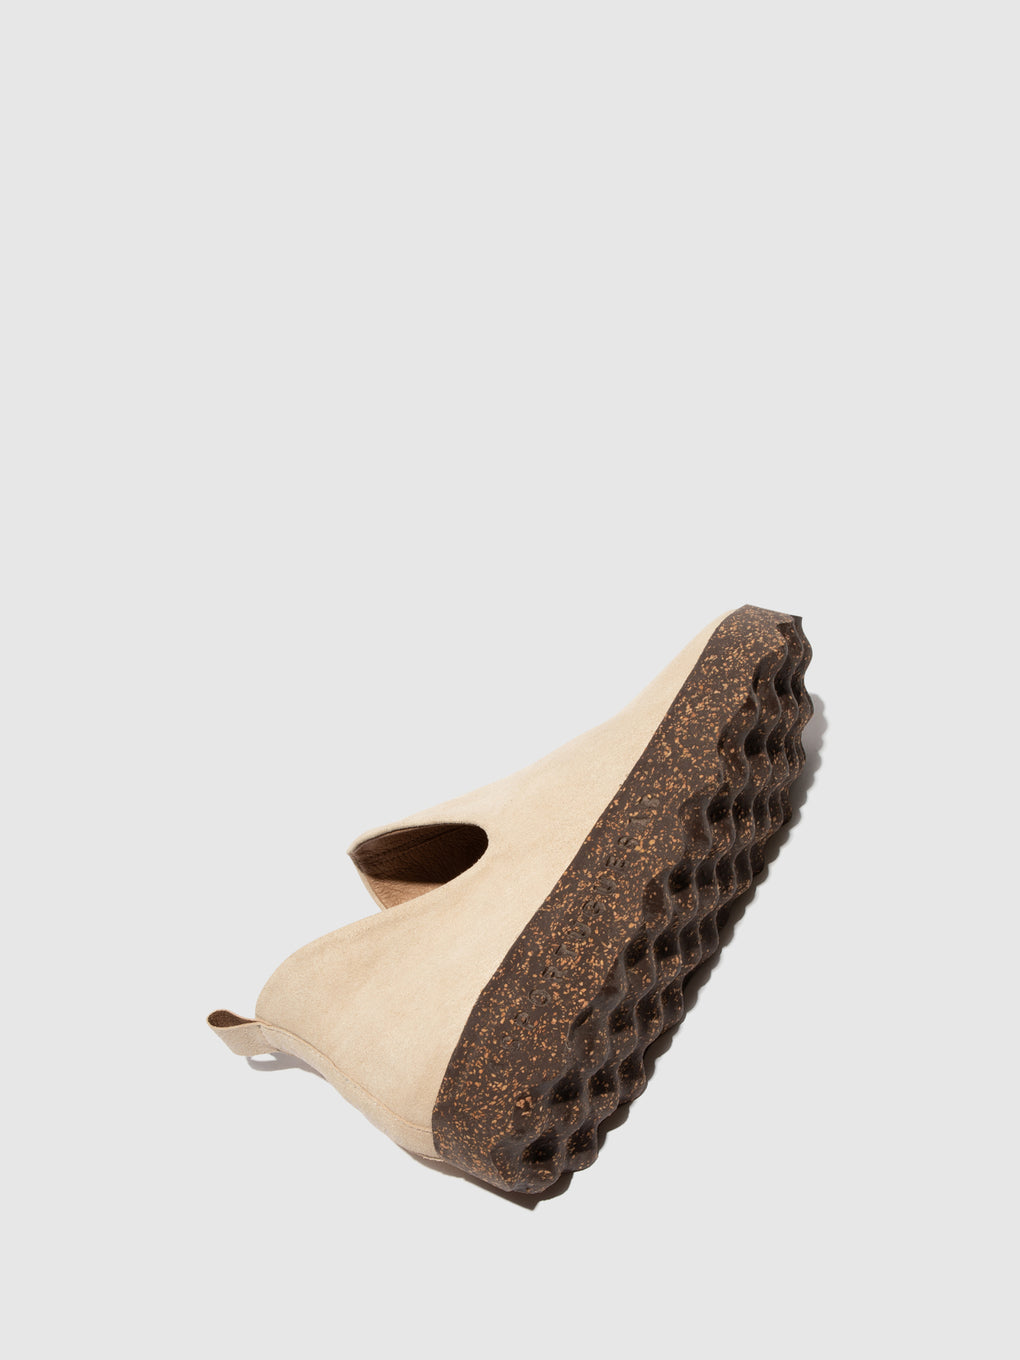 Slip-on Trainers CITY Beige (Suede)